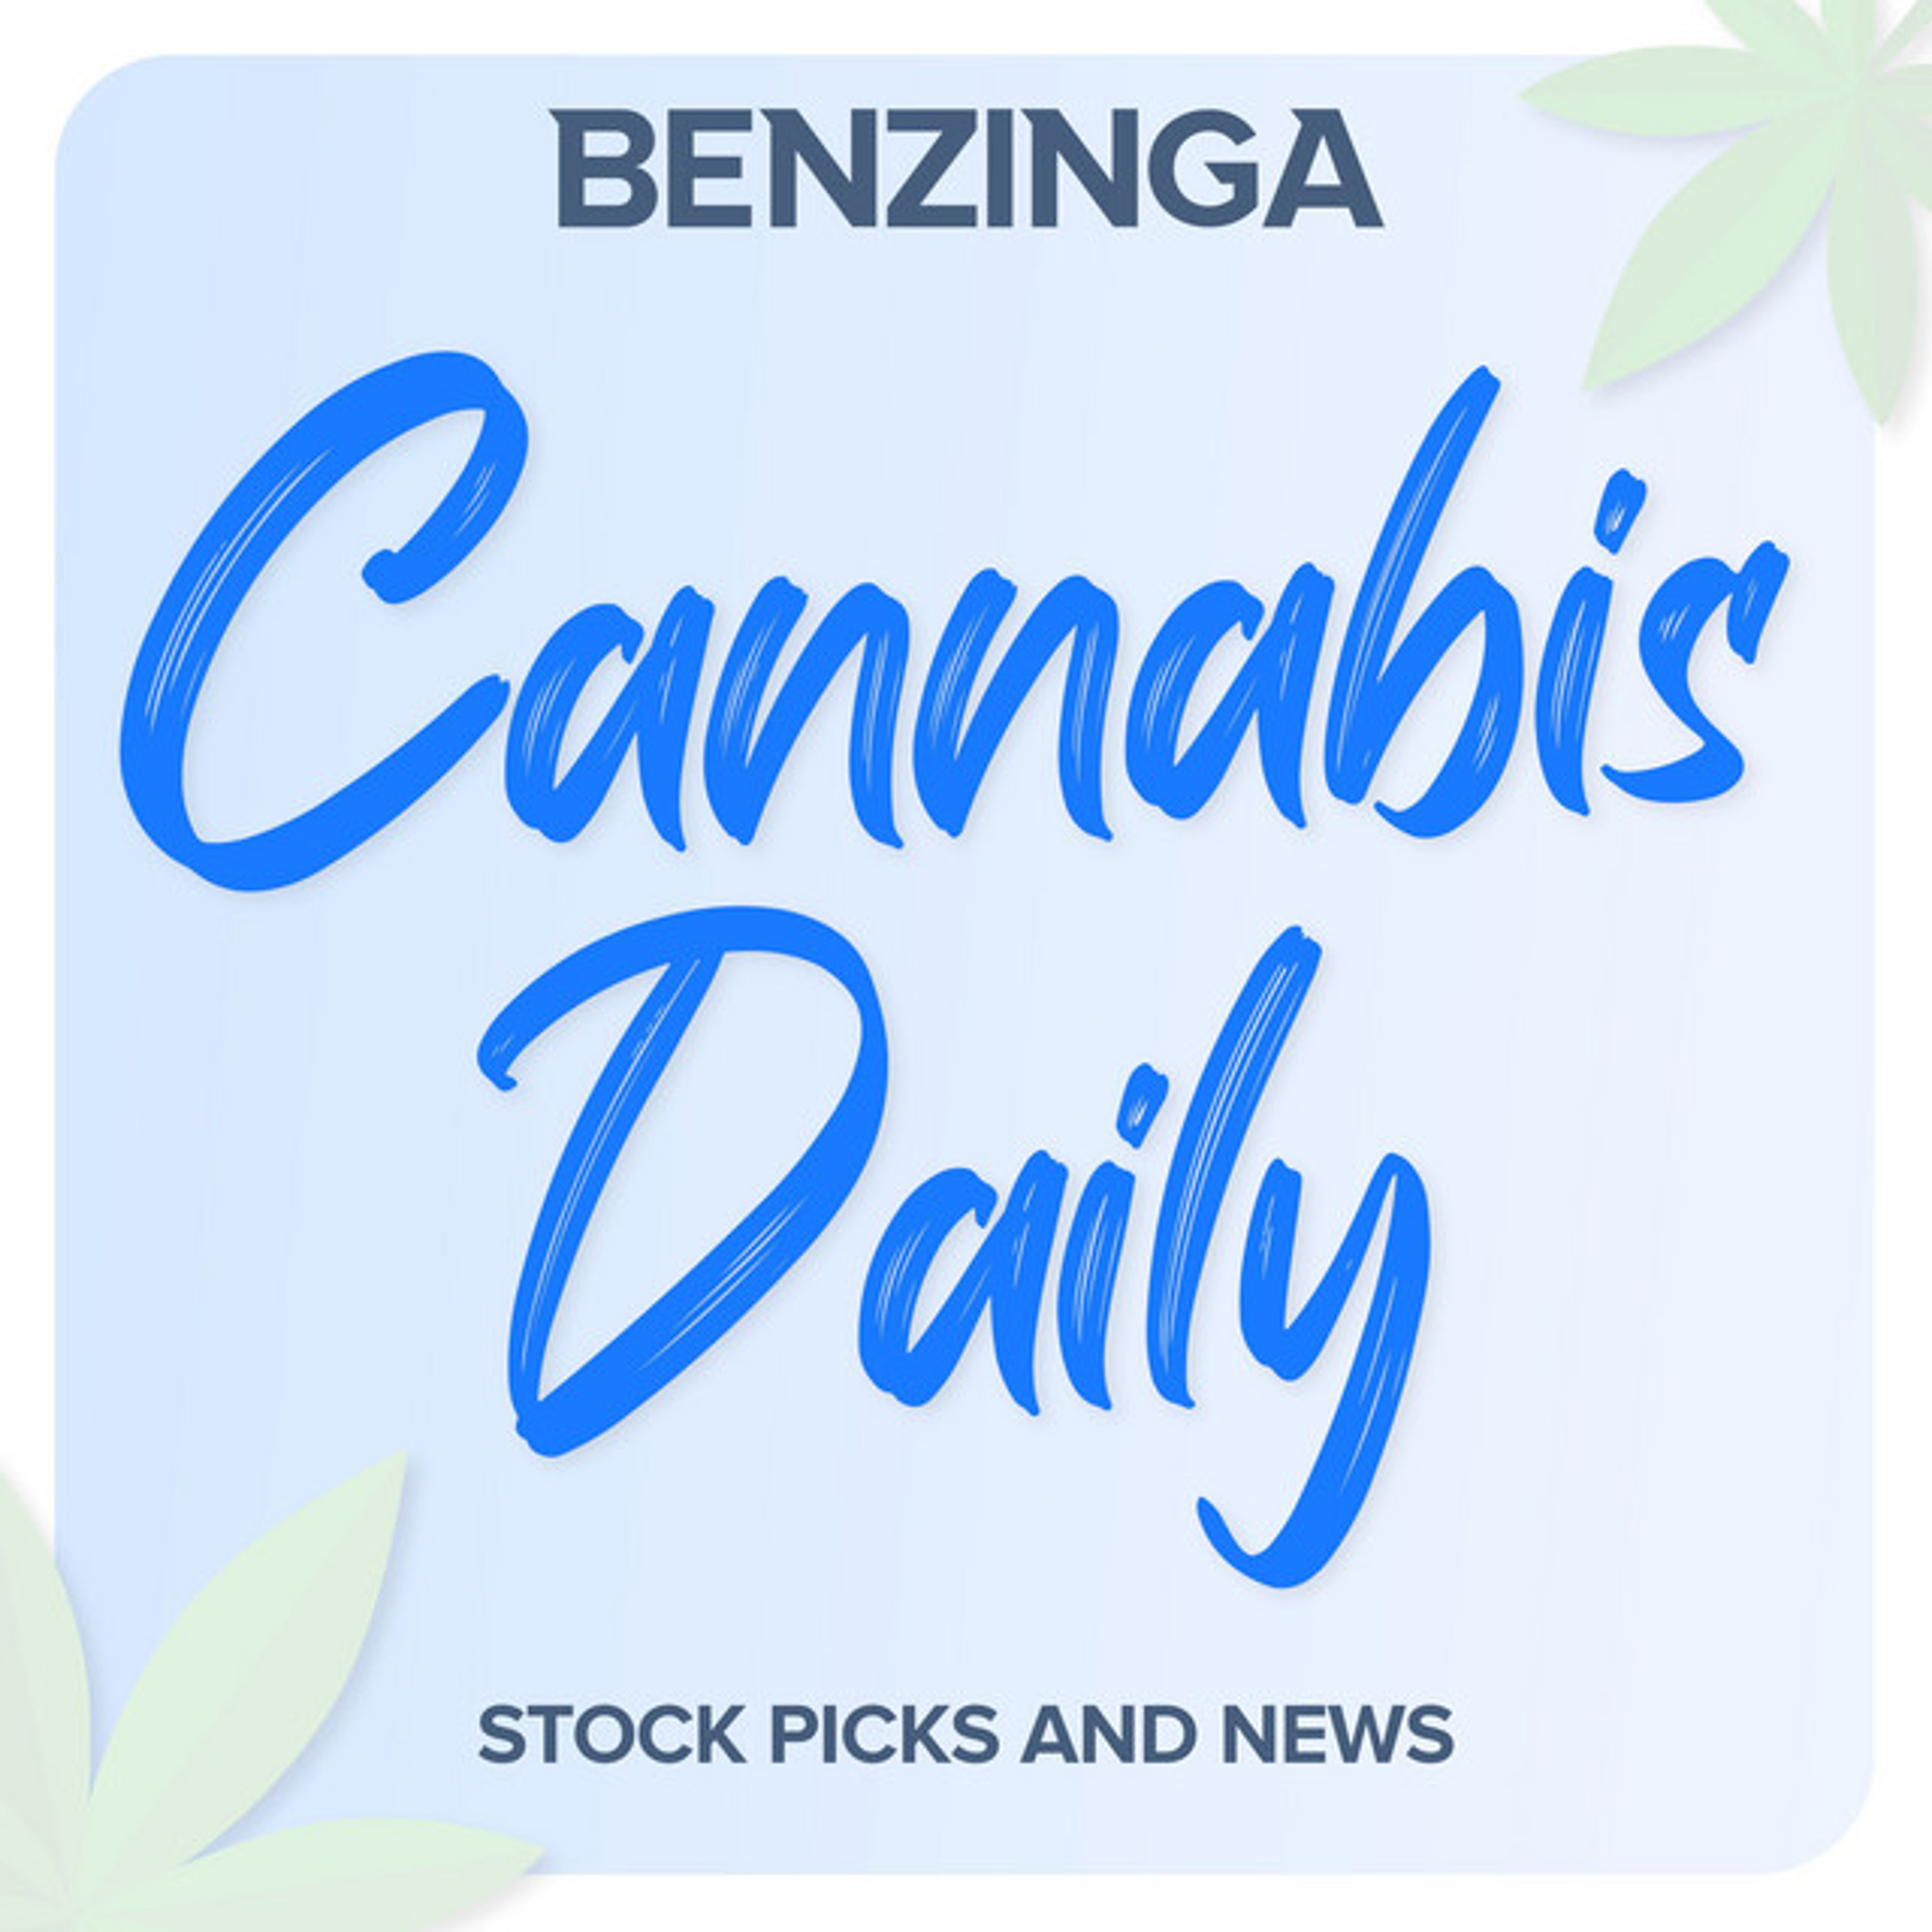 Cannabis Stocks To Buy Without Any Hesitation